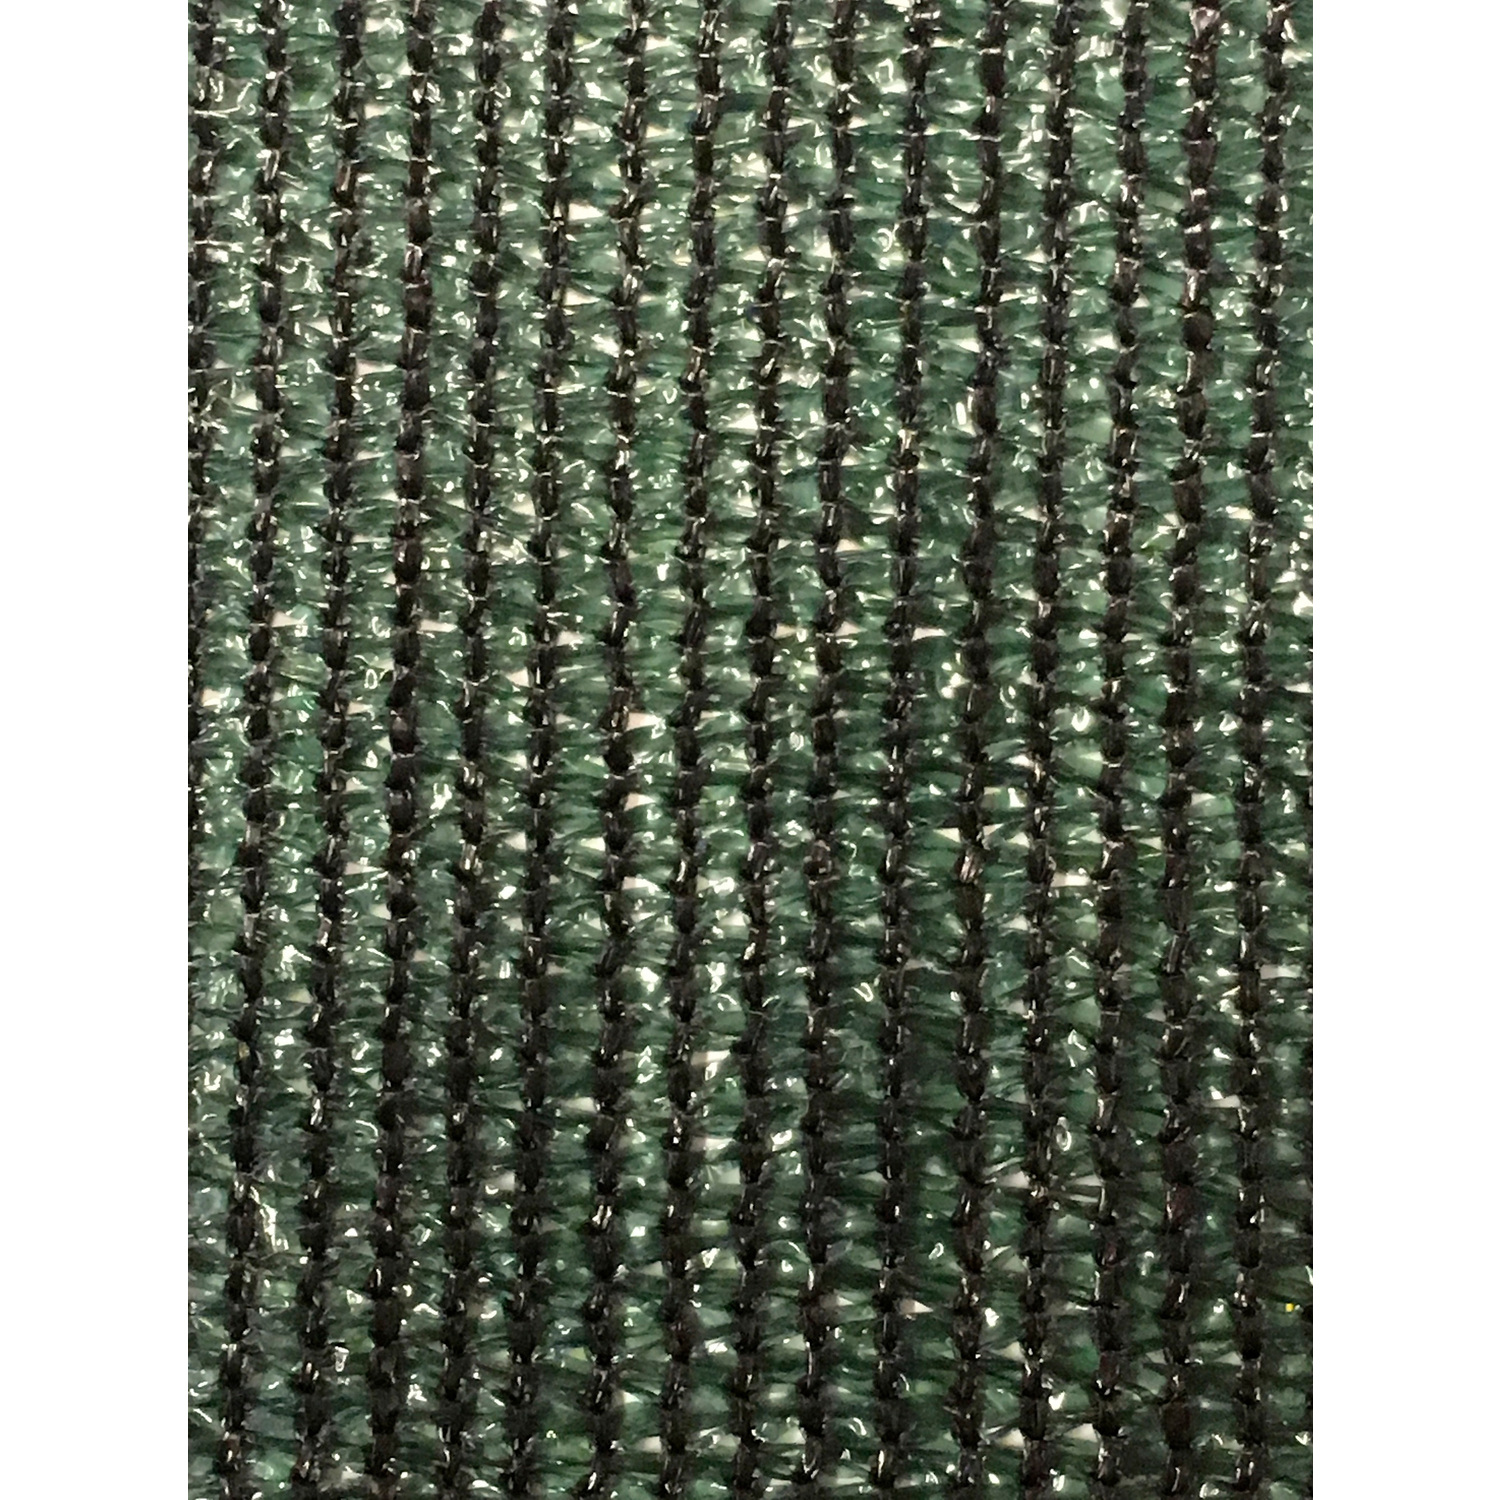 Riverstone Industries PF-630-Green 5.8 x 30 ft. Knitted Privacy Cloth - Green - image 2 of 4